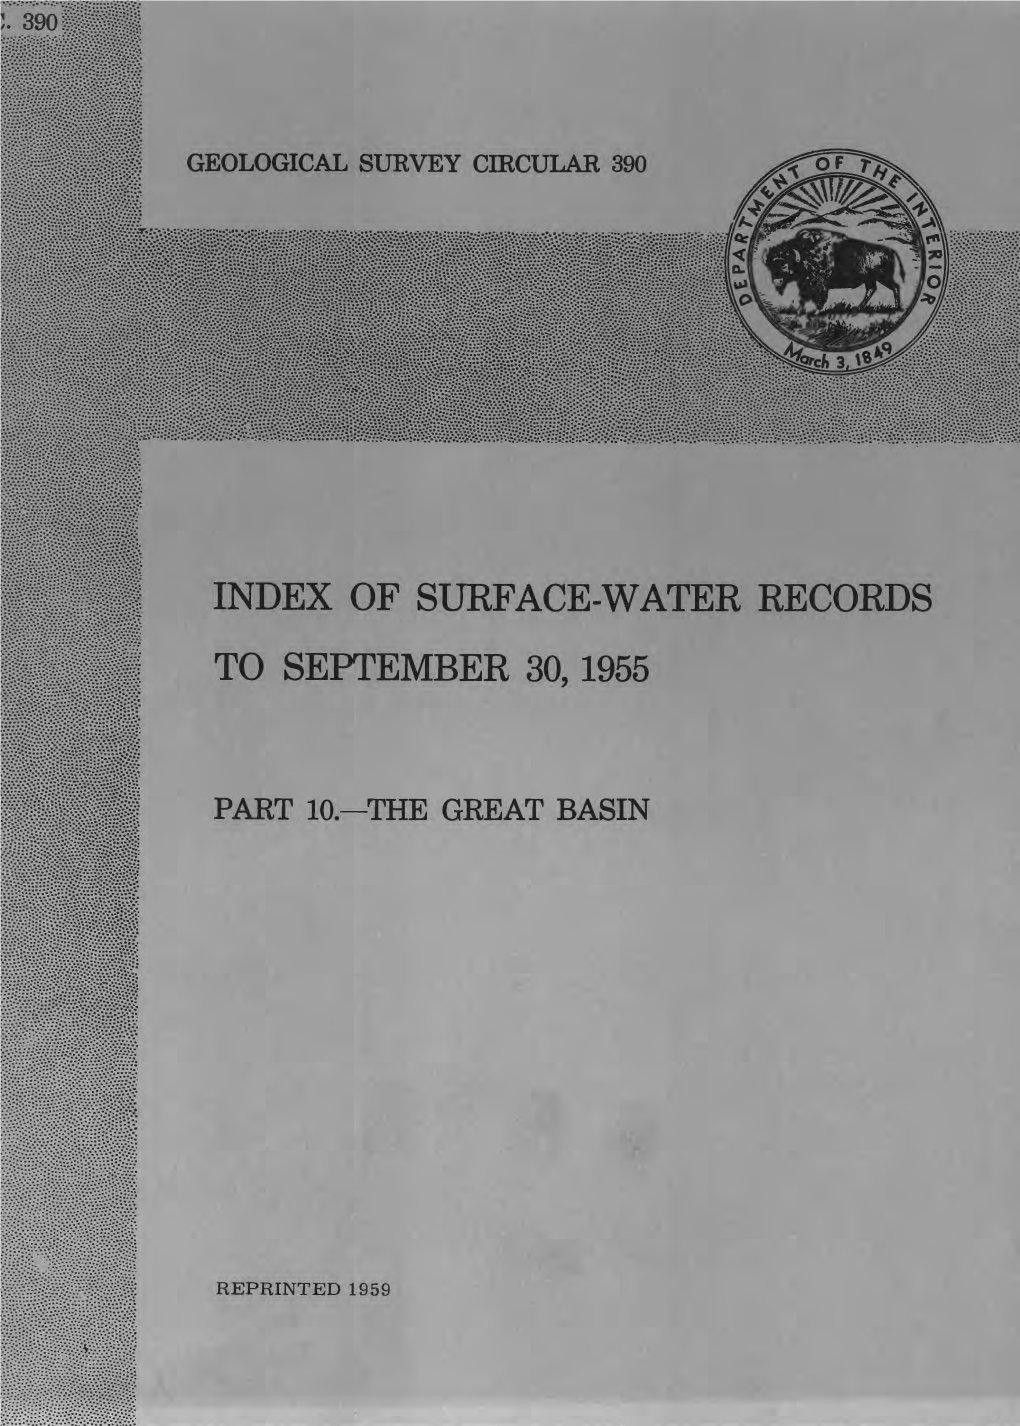 Of Surface-Water Records to September 30,1955